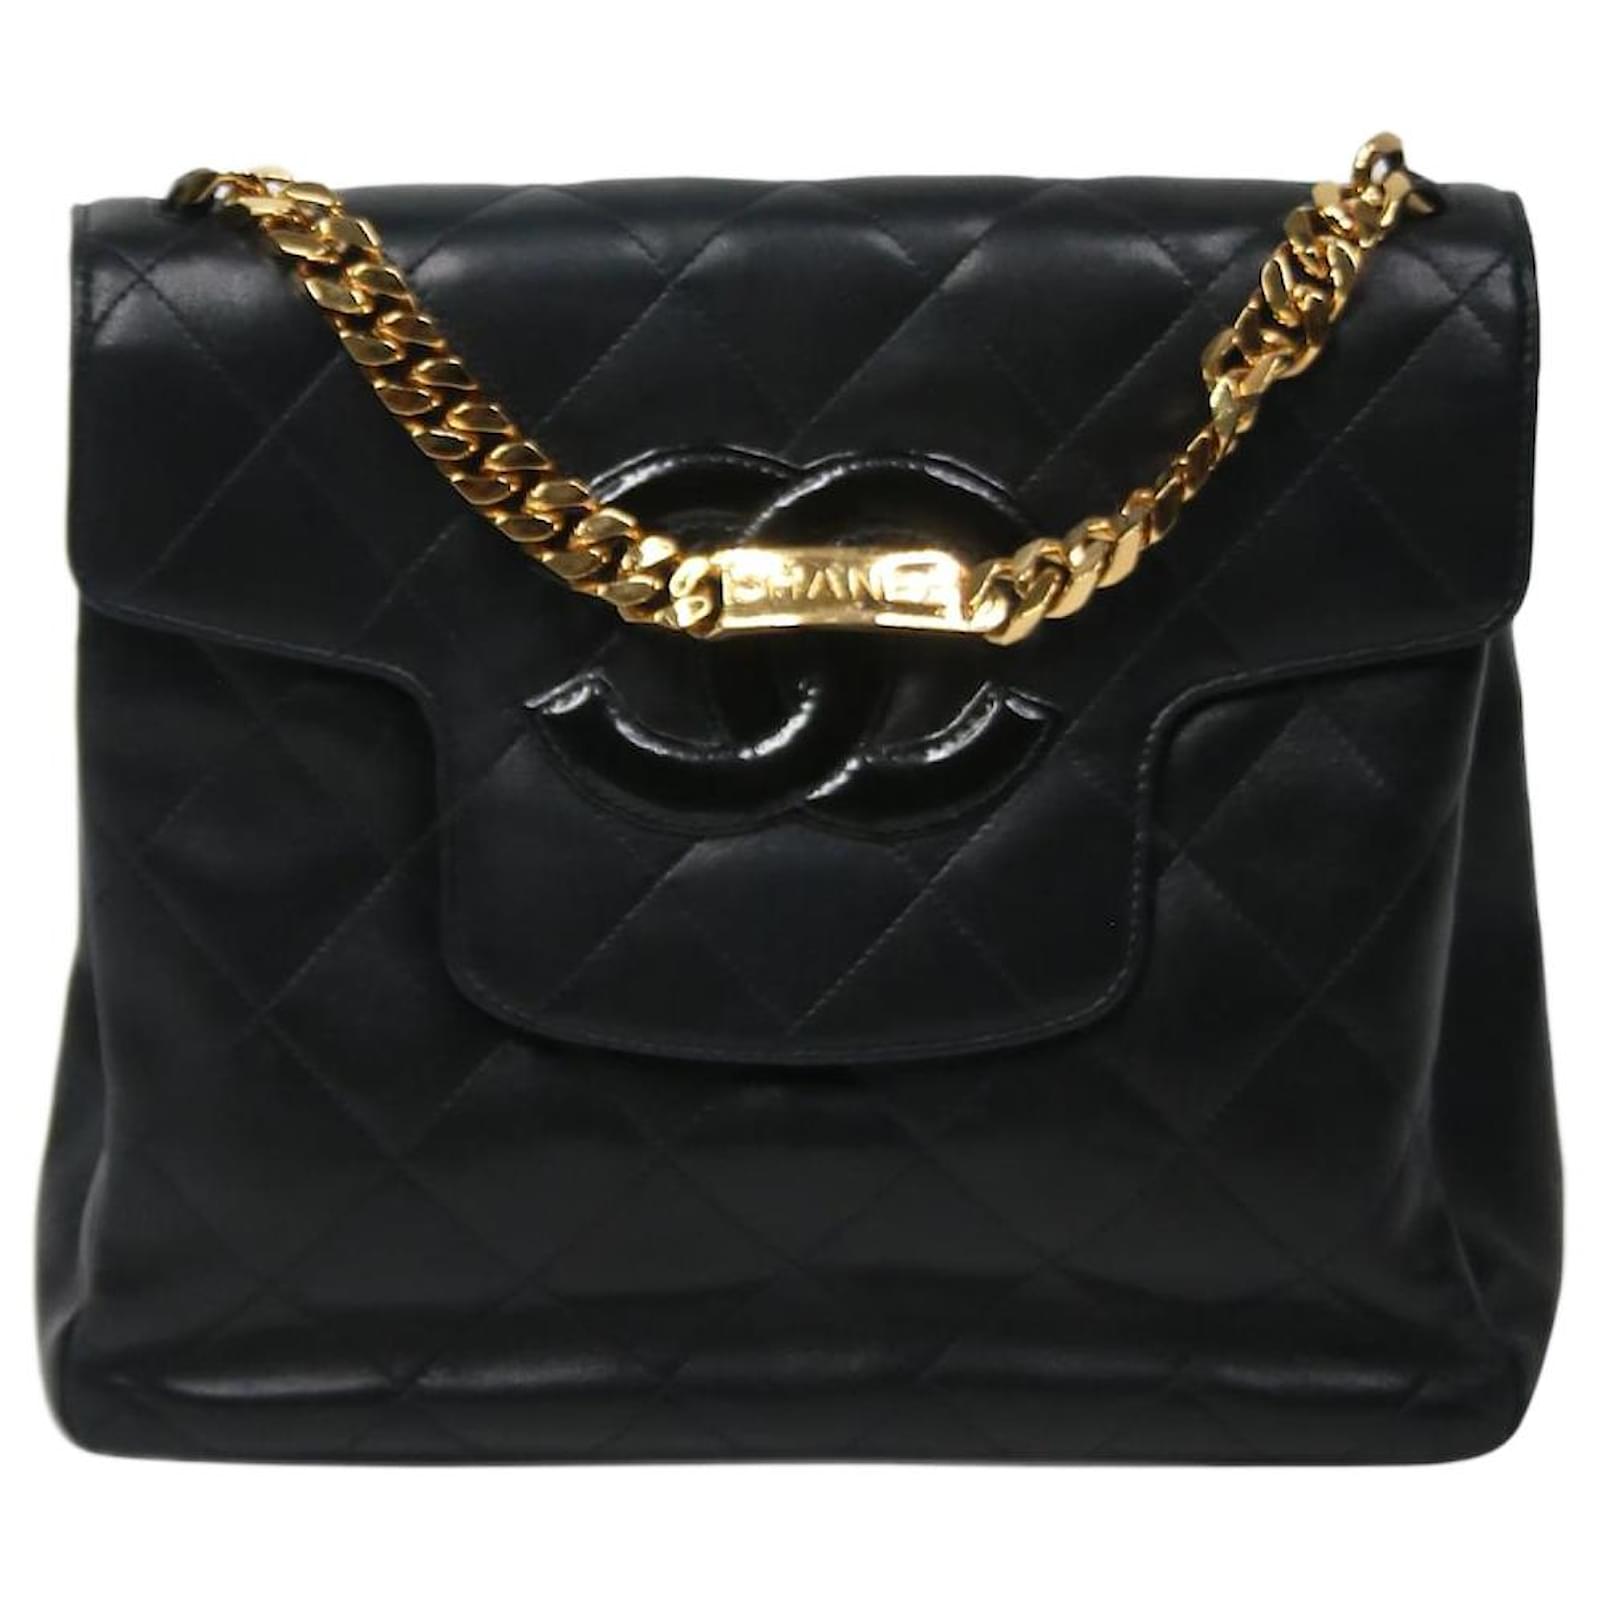 Chanel Classic Rare Limited Edition 1994 Flap Bag